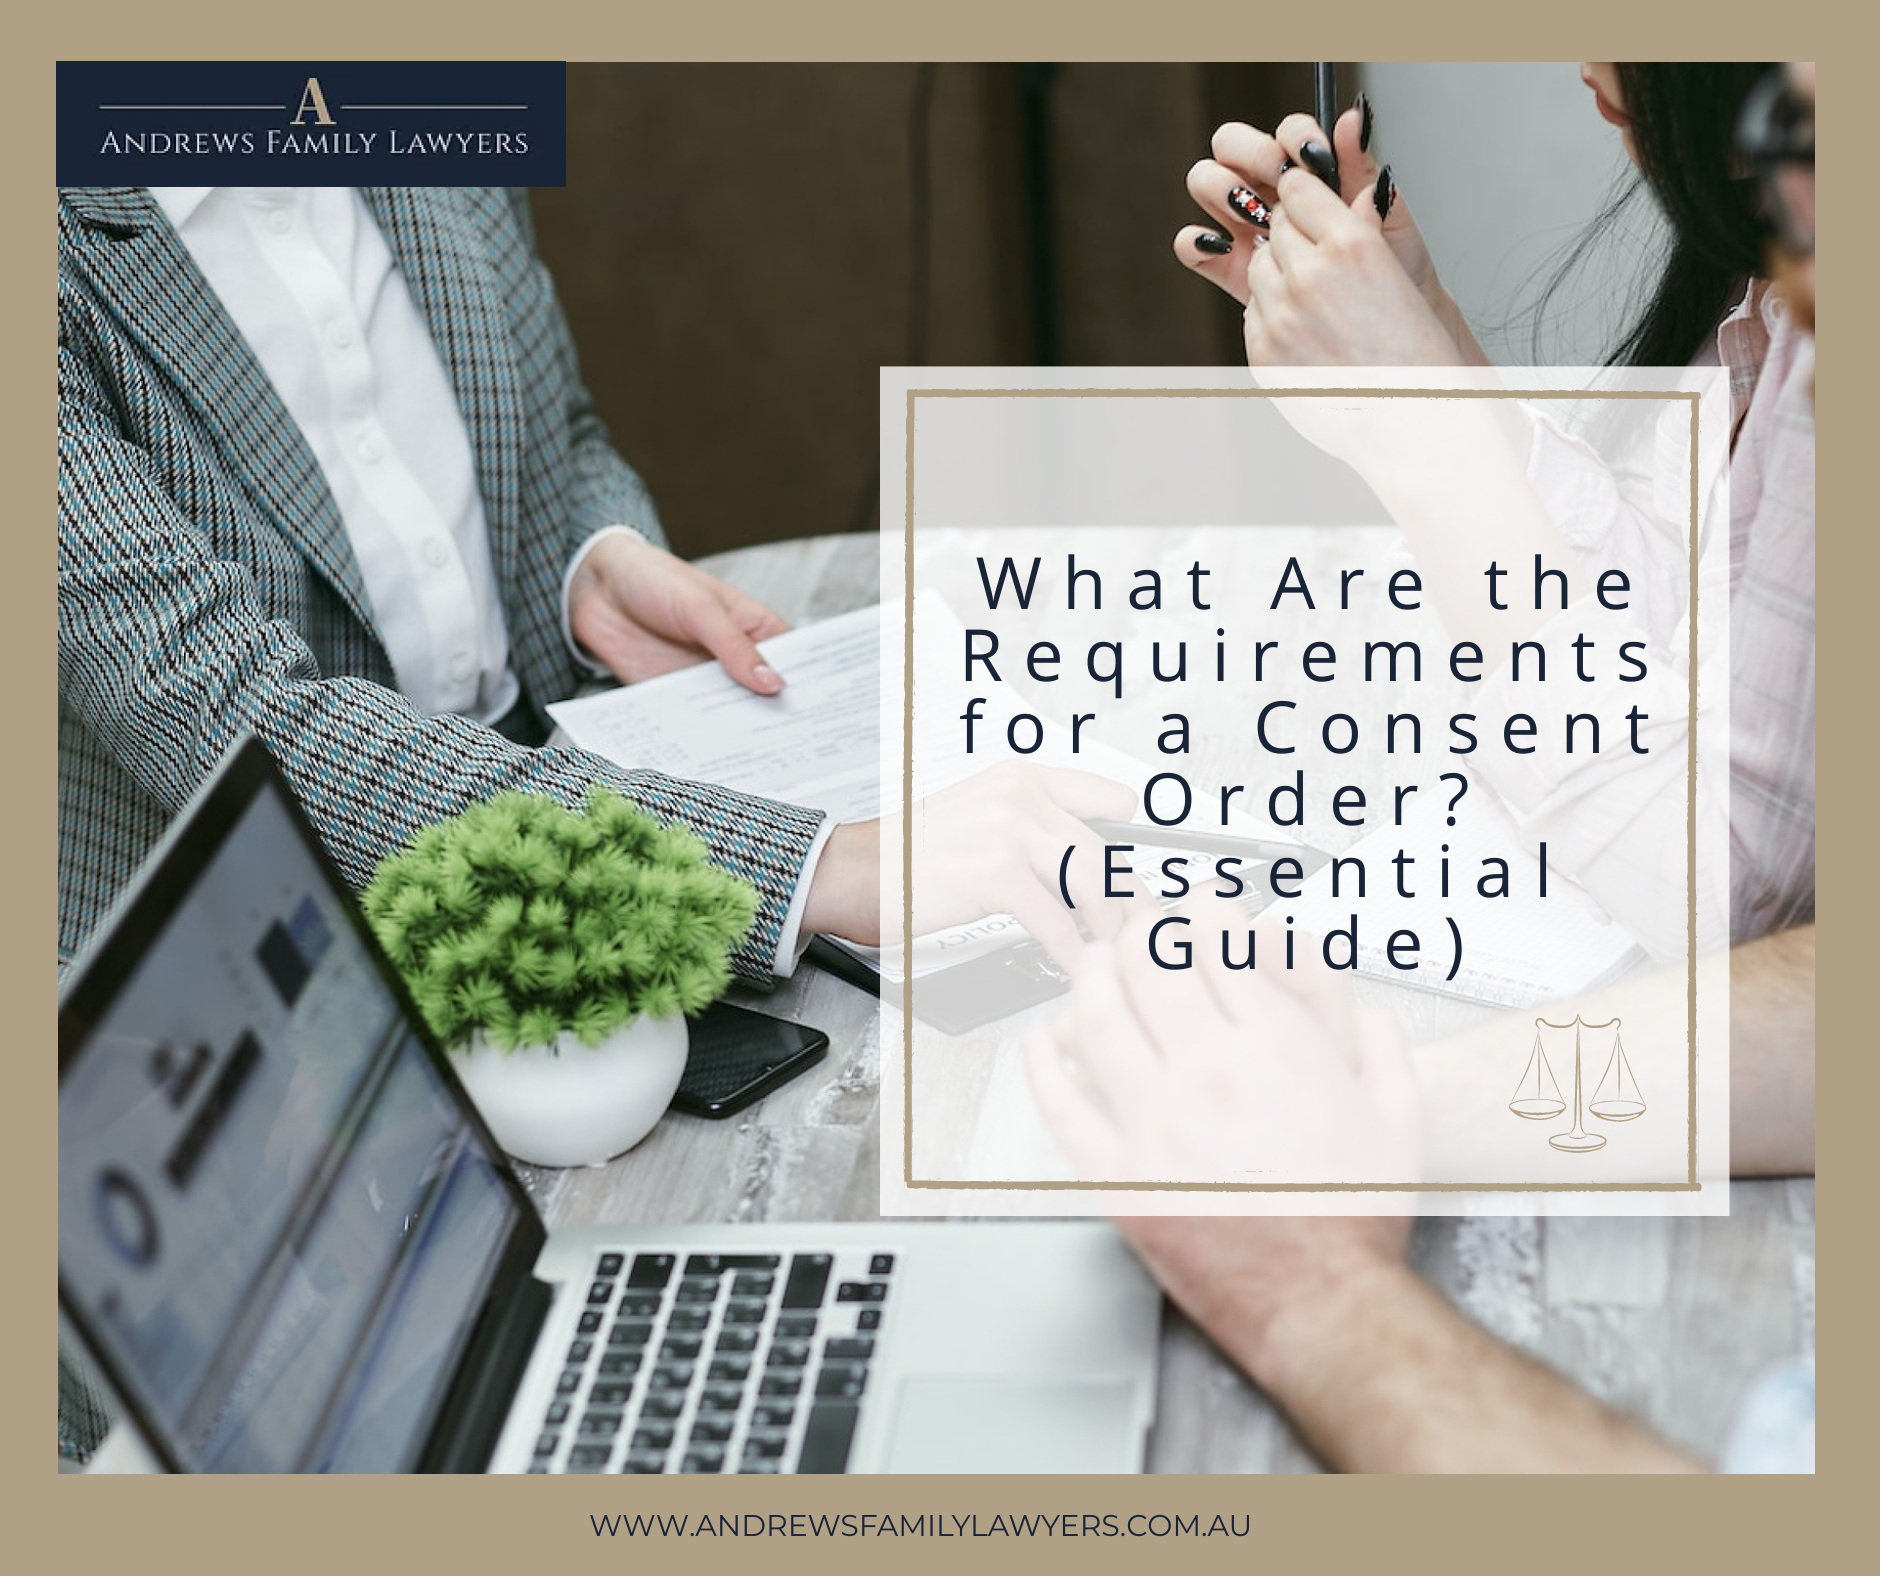 What Are the Requirements for a Consent Order? (Essential Guide)